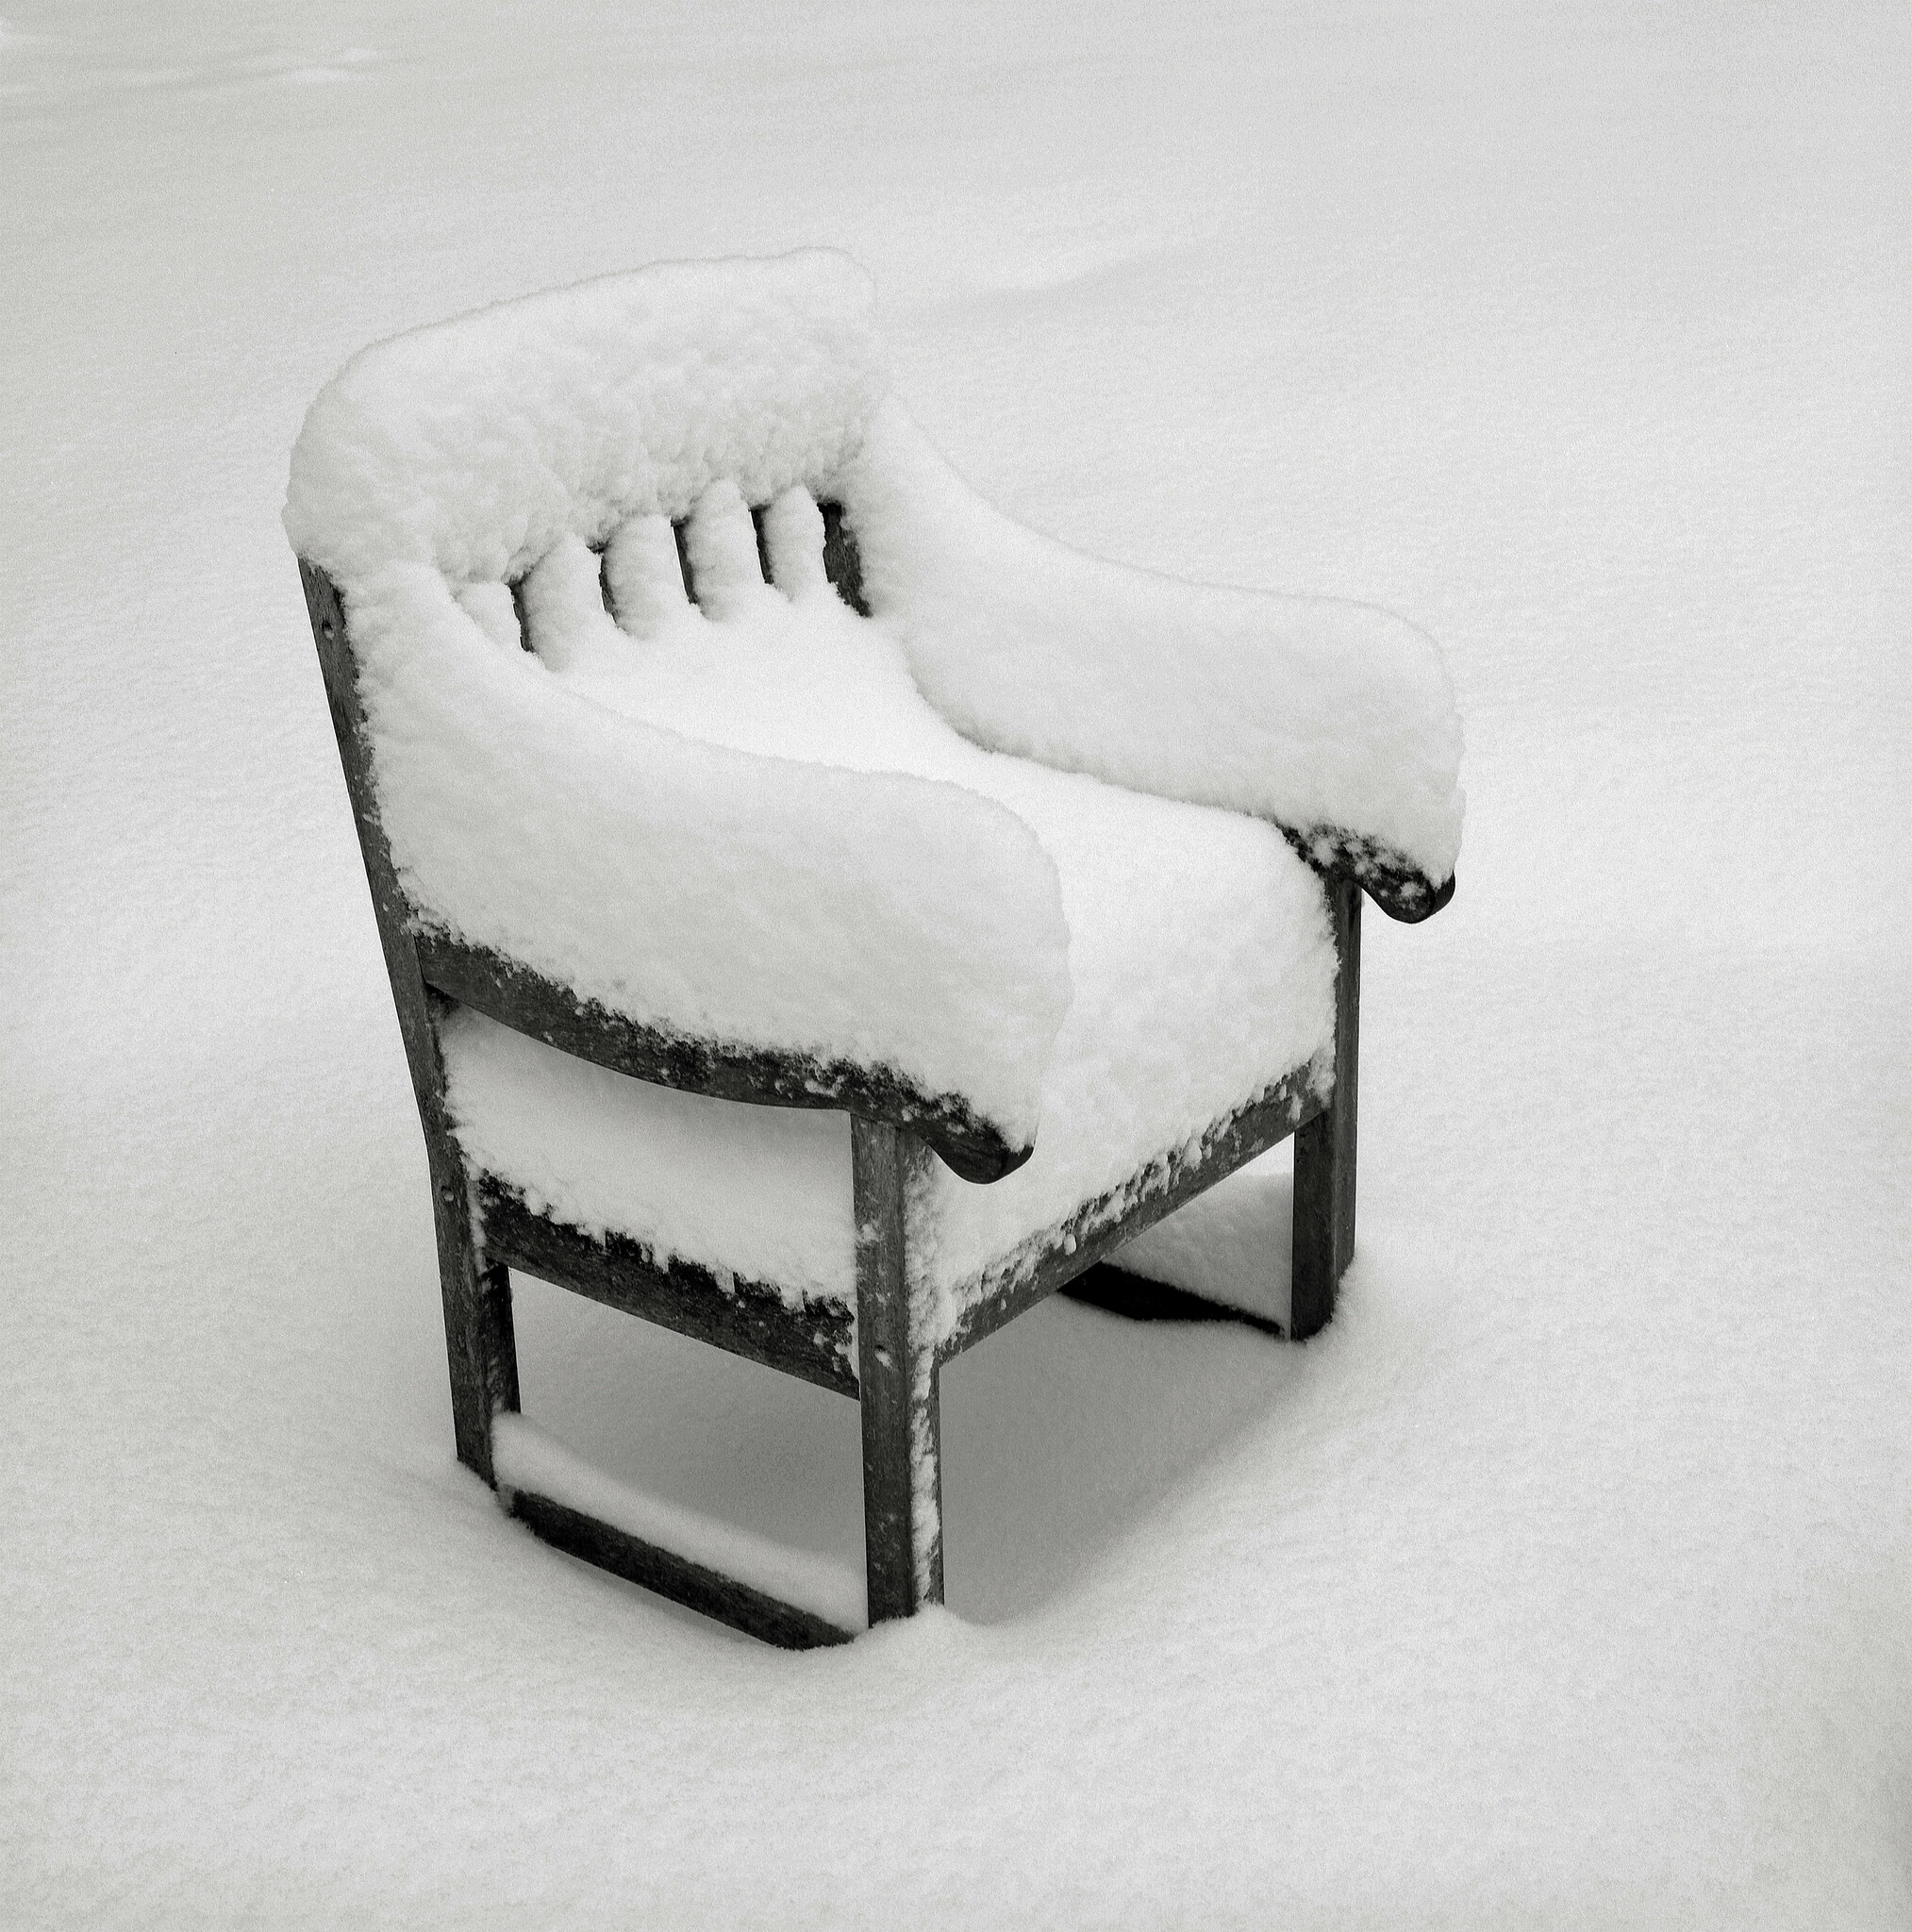 Chair in Snow, Portland 